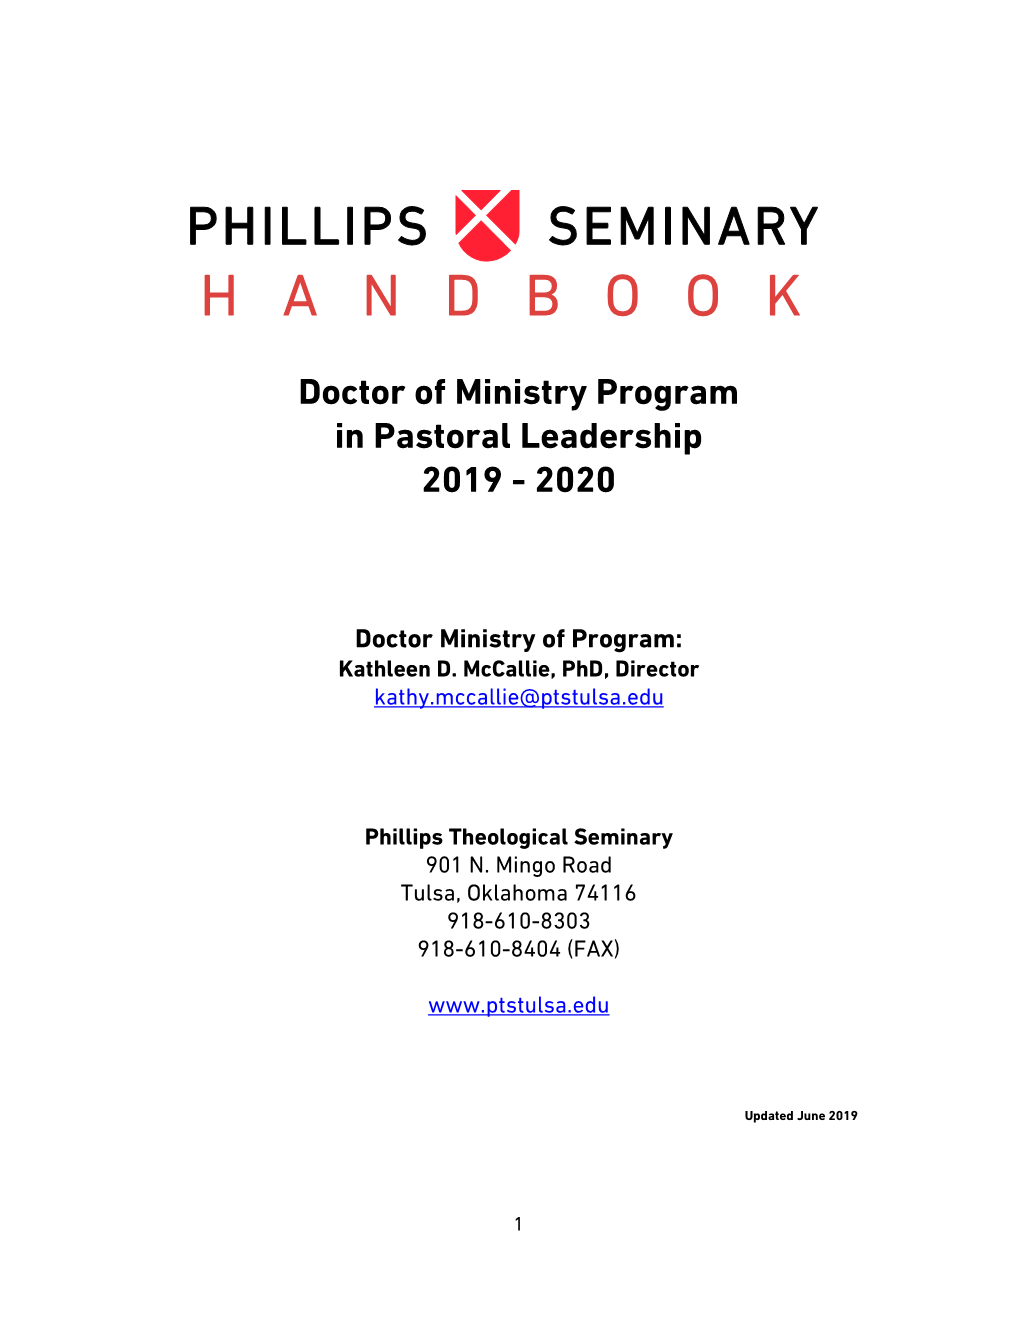 Handbook for Doctor of Ministry Students